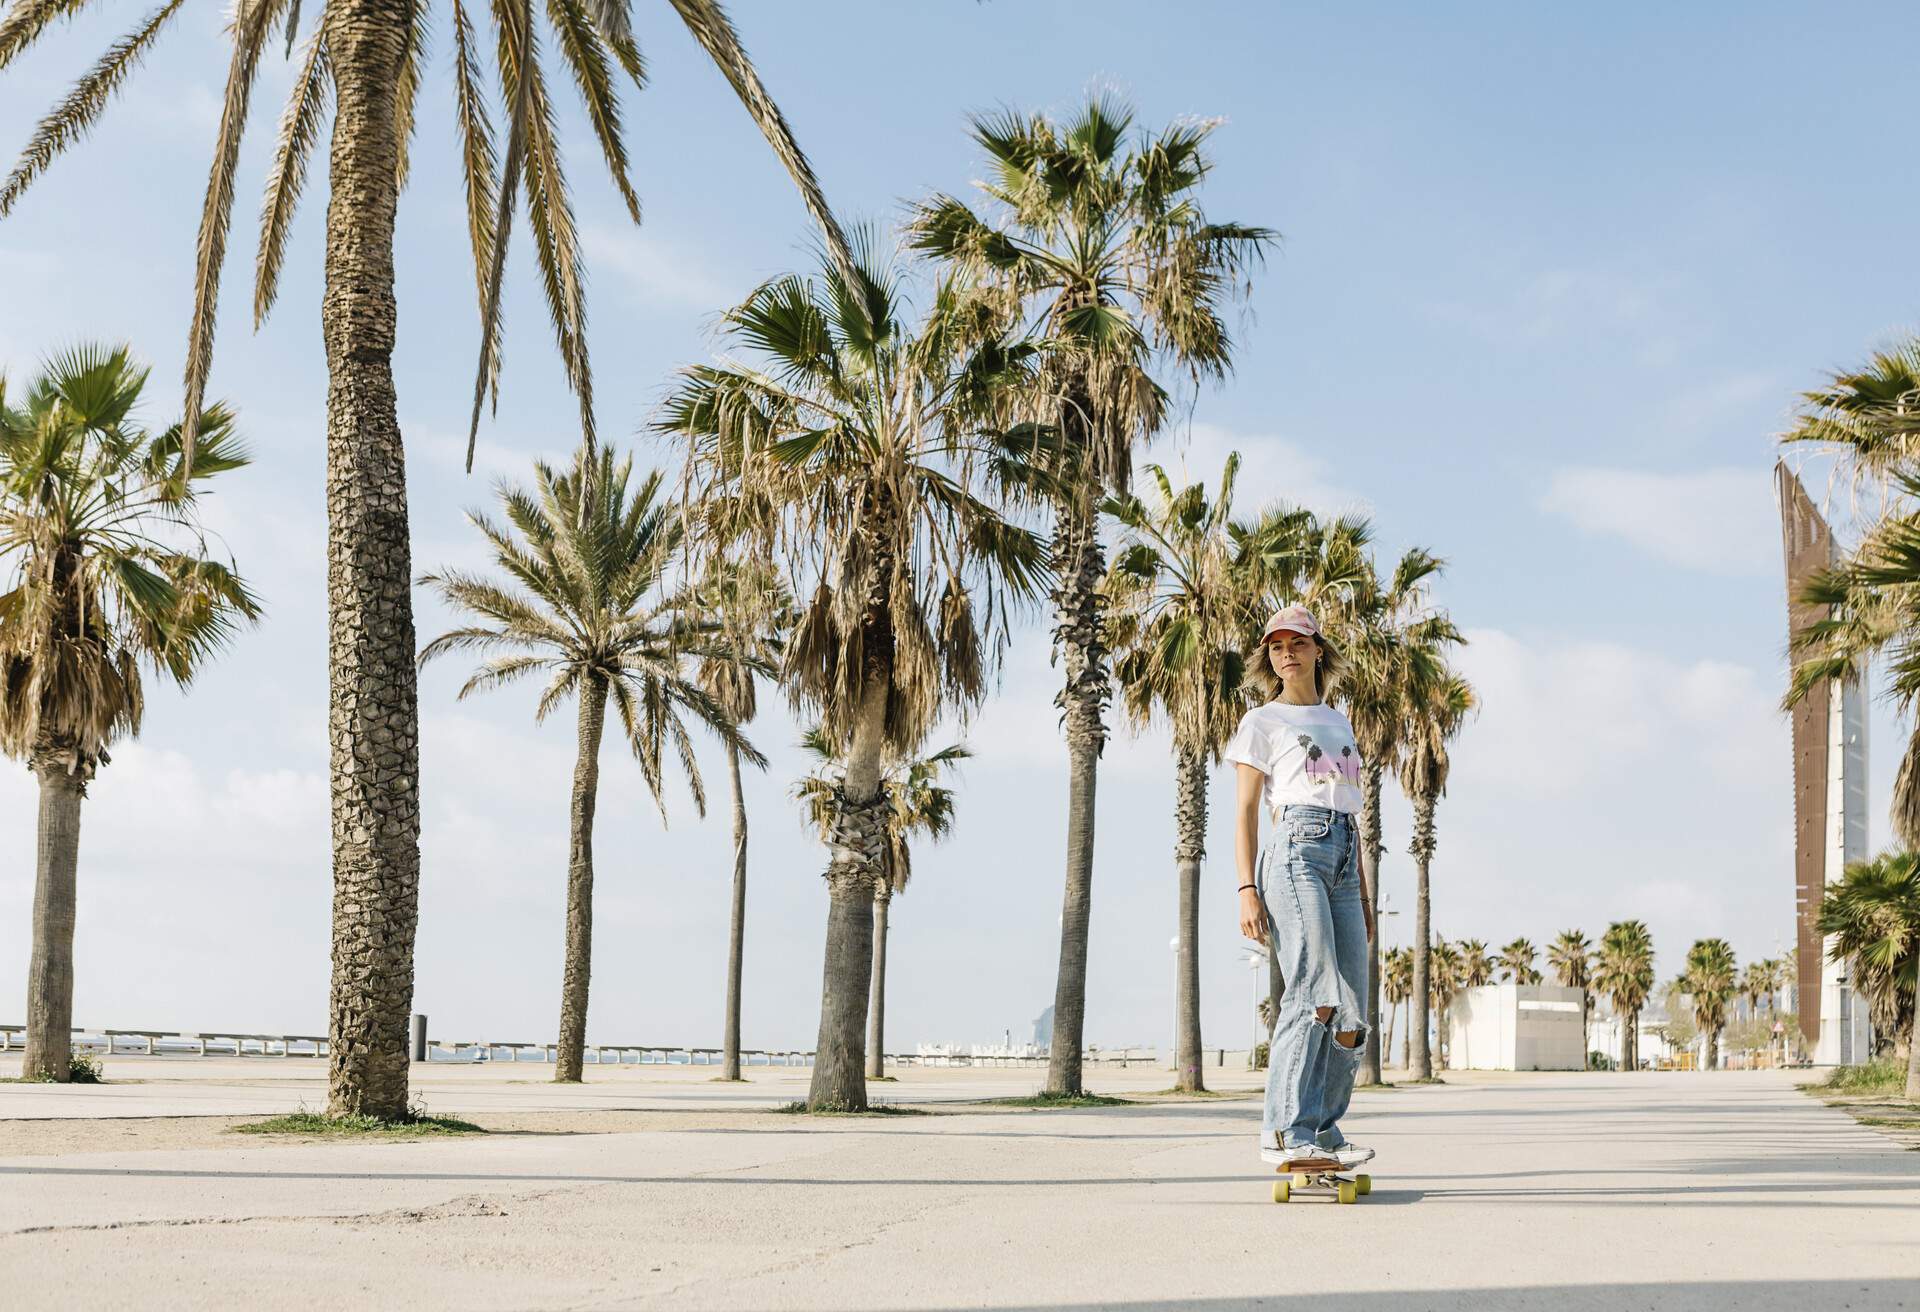 dest_spain_barcelona_theme_beach_skate_palm_trees_gettyimages-1319659624_universal_within-usage-period_83582